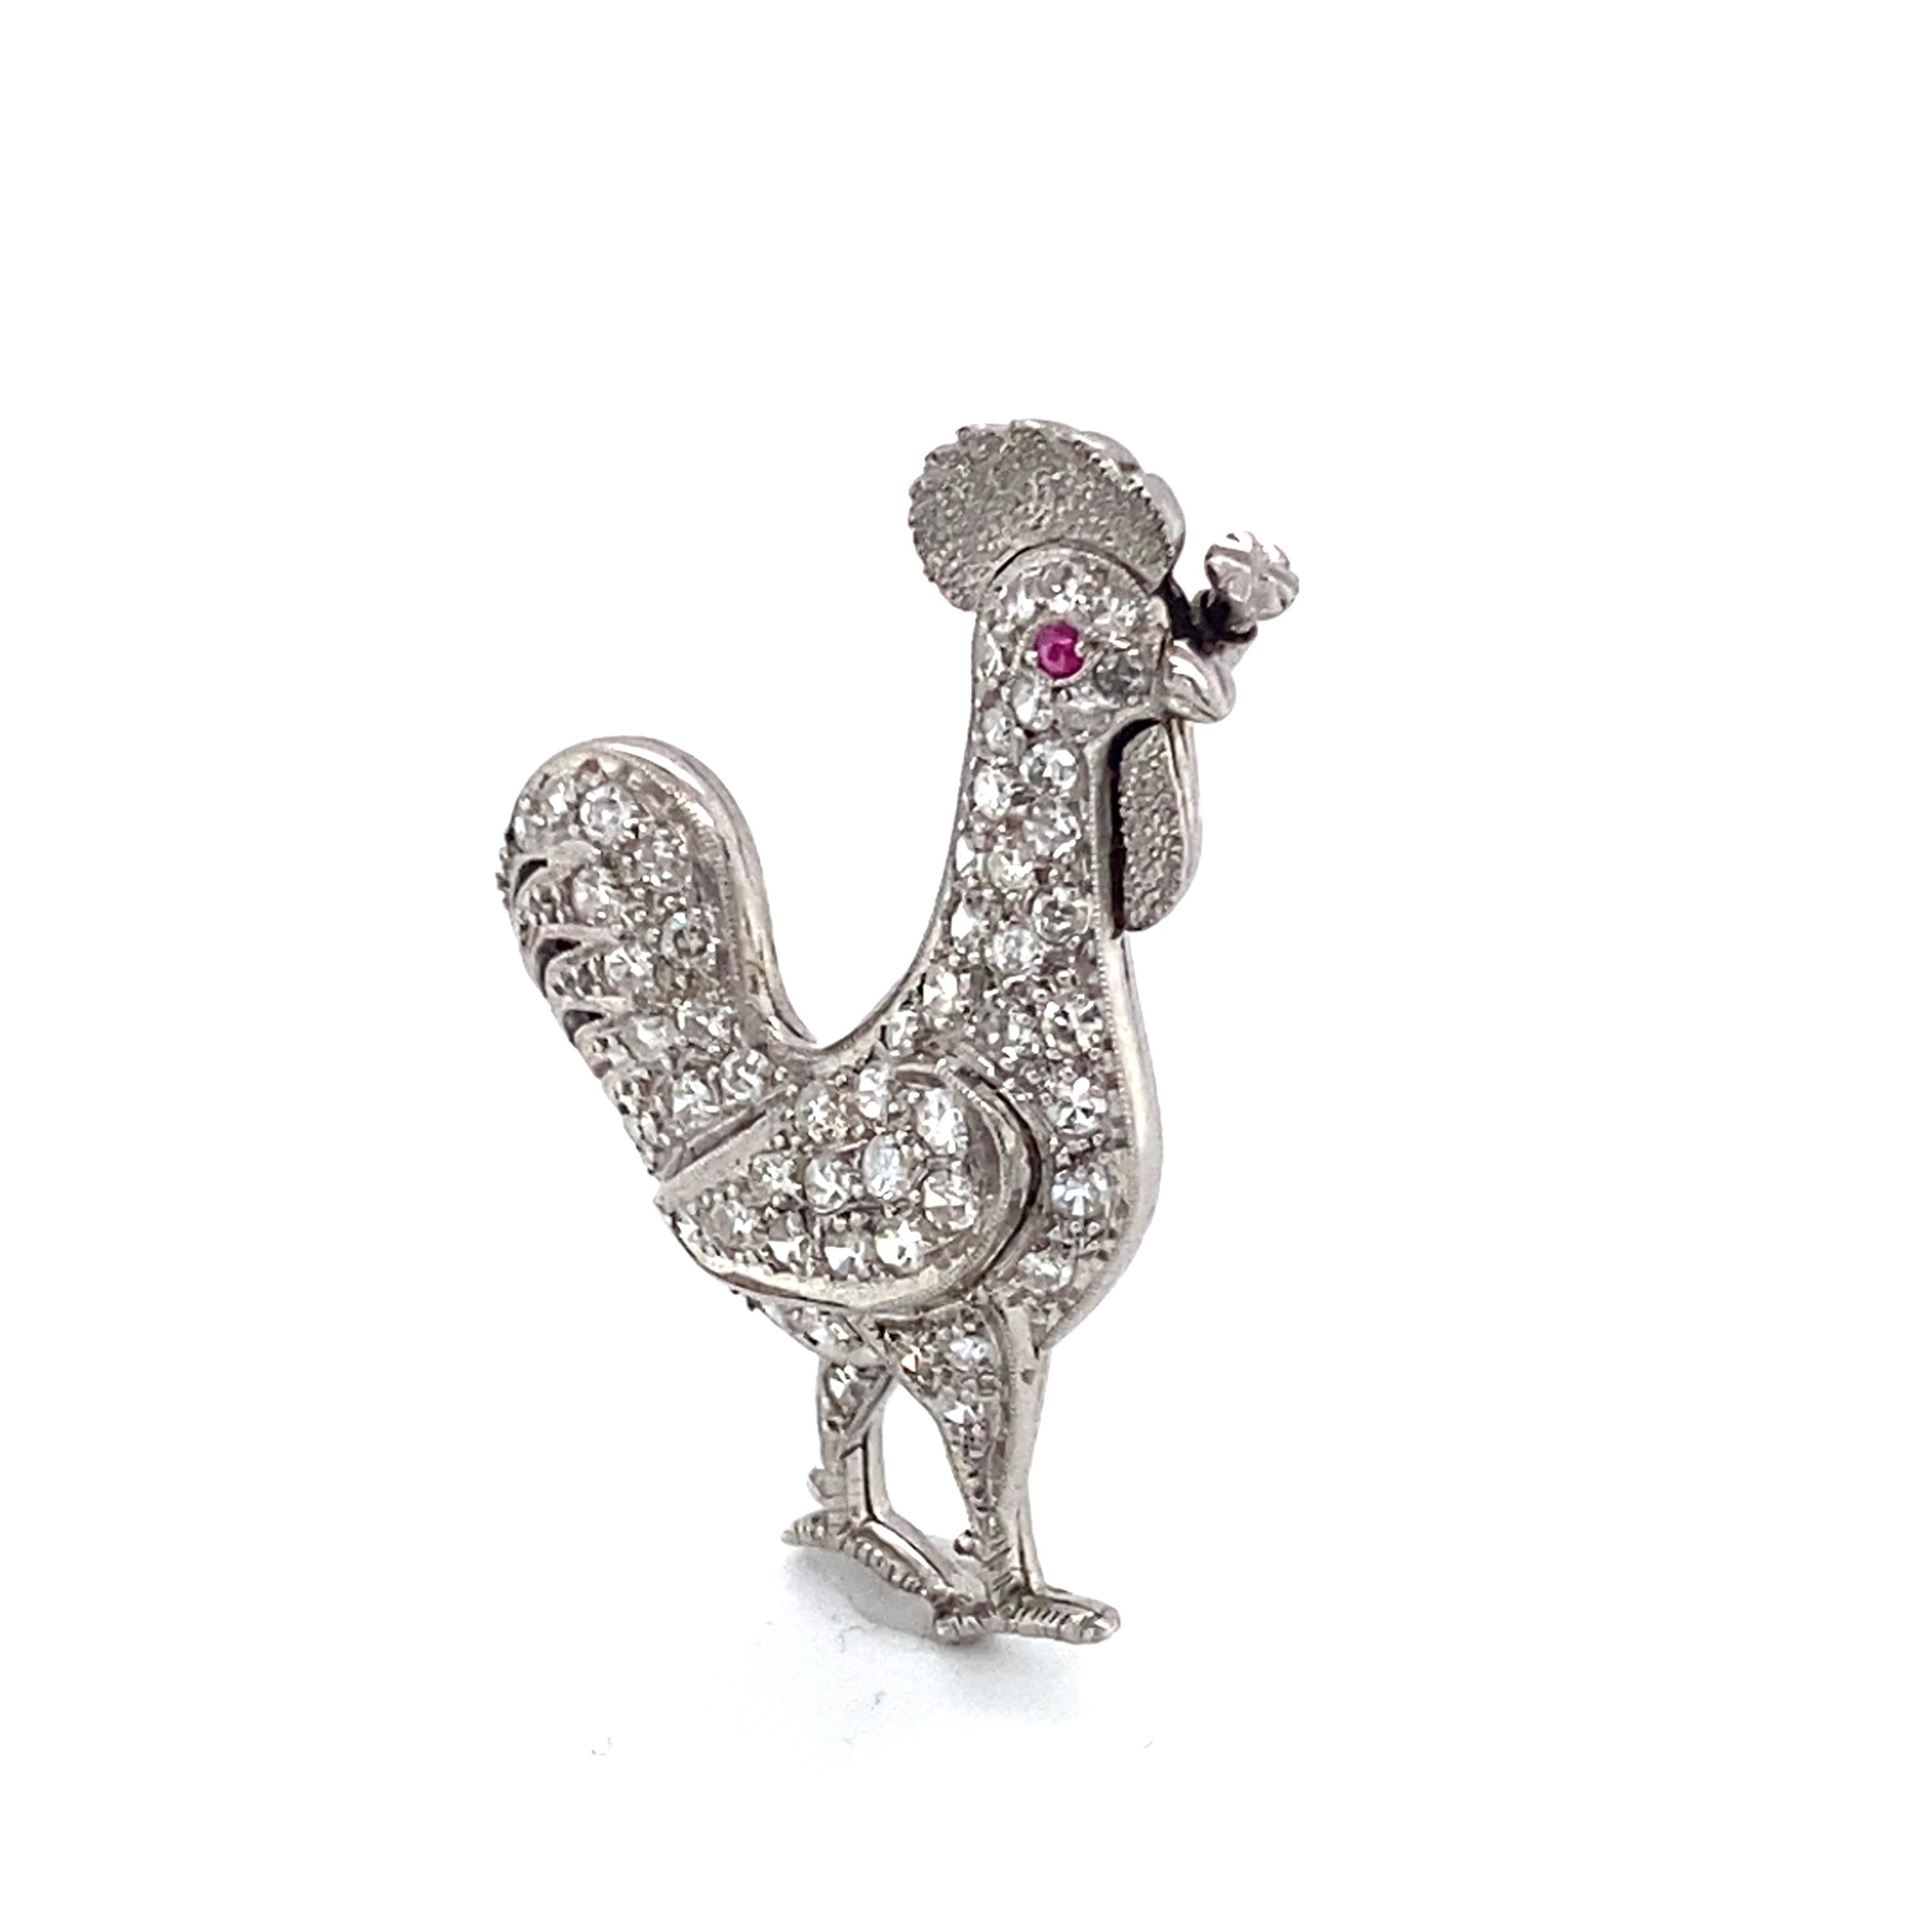 1915 Art Deco 1 Carat Diamond and Ruby Rooster Brooch Pin, Platinum In Excellent Condition For Sale In Atlanta, GA